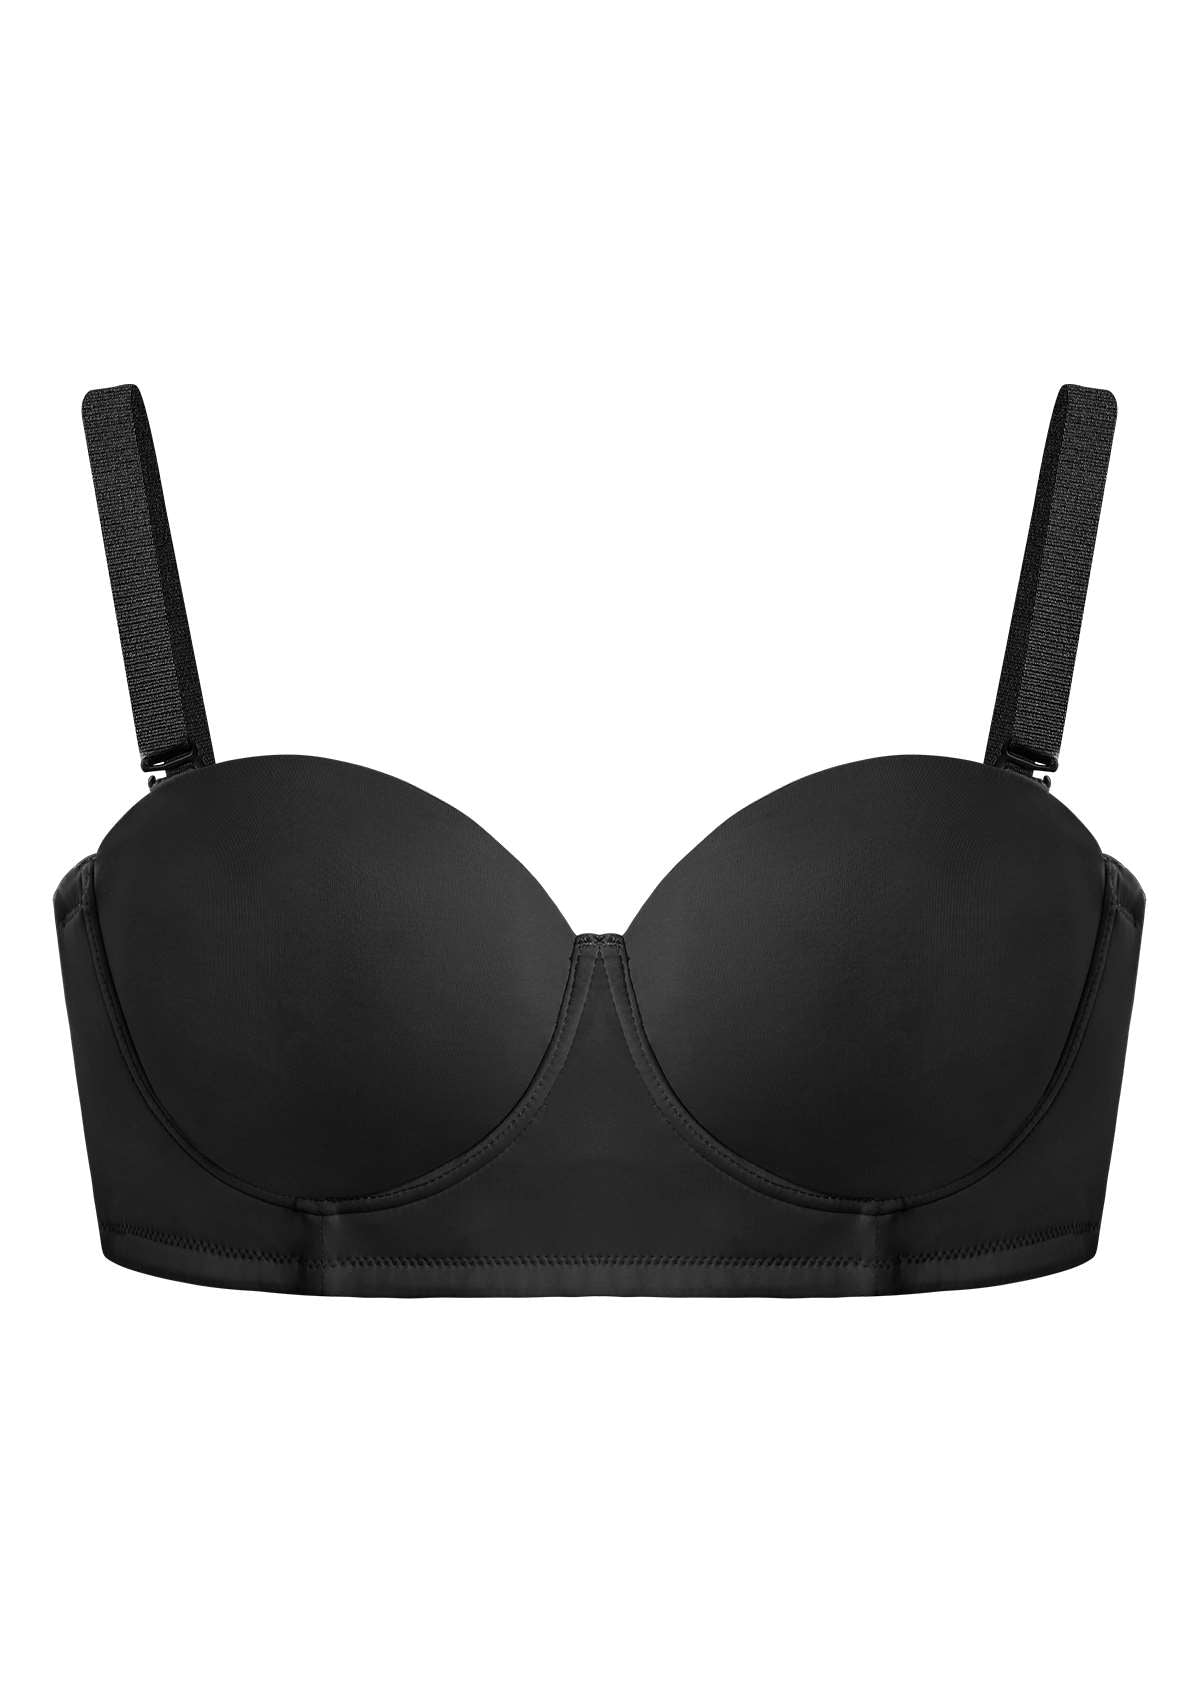 HSIA Margaret Molded Convertible Multiway Classic Strapless Bra - Black / 42 / D